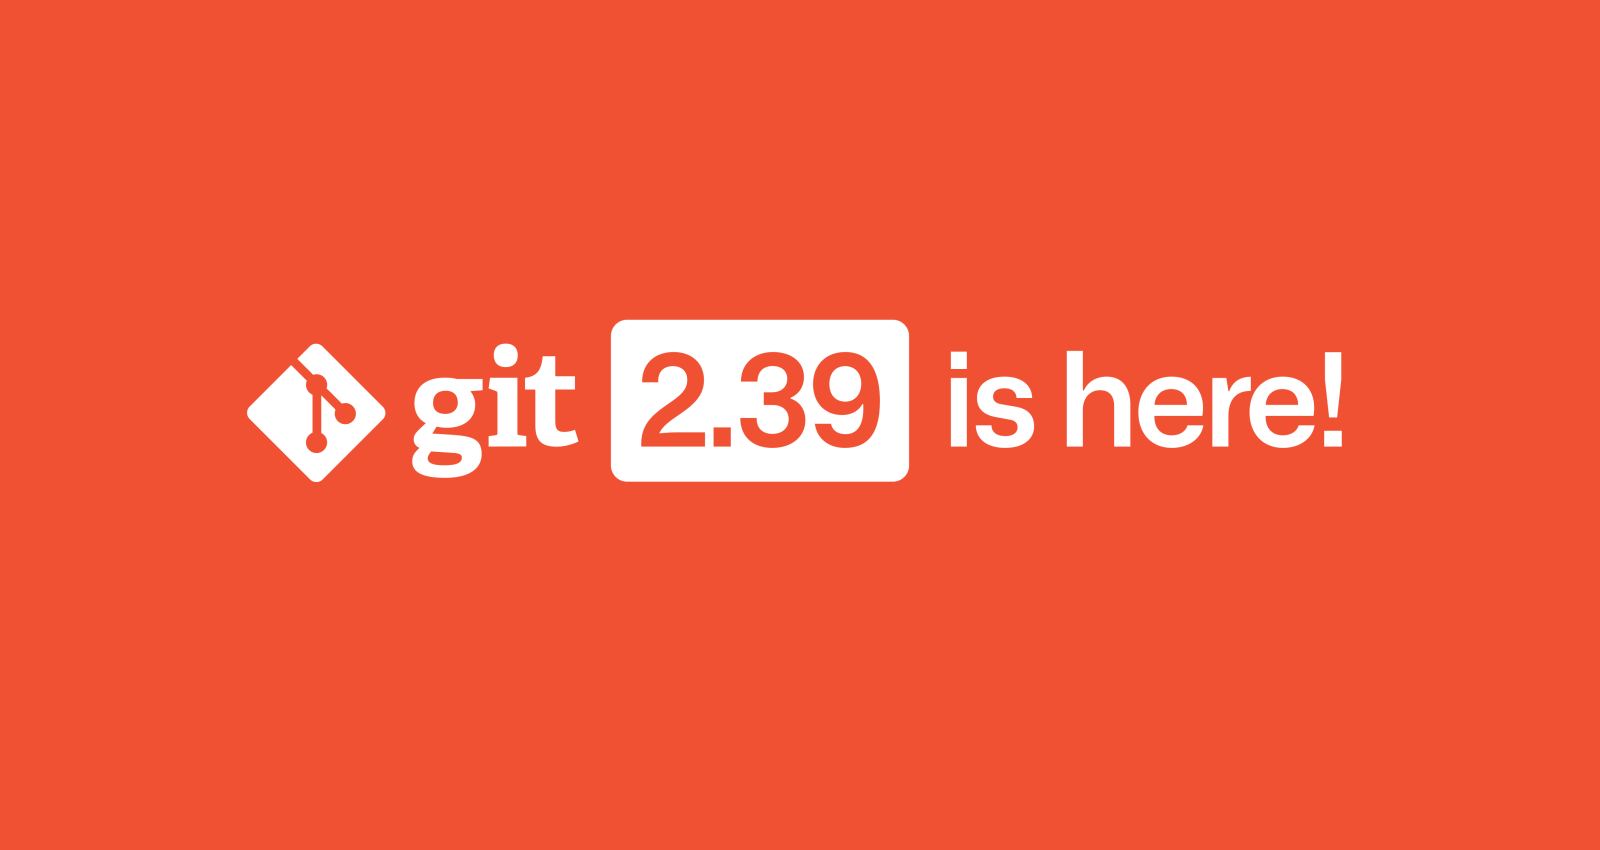 Highlights from Git 2.39